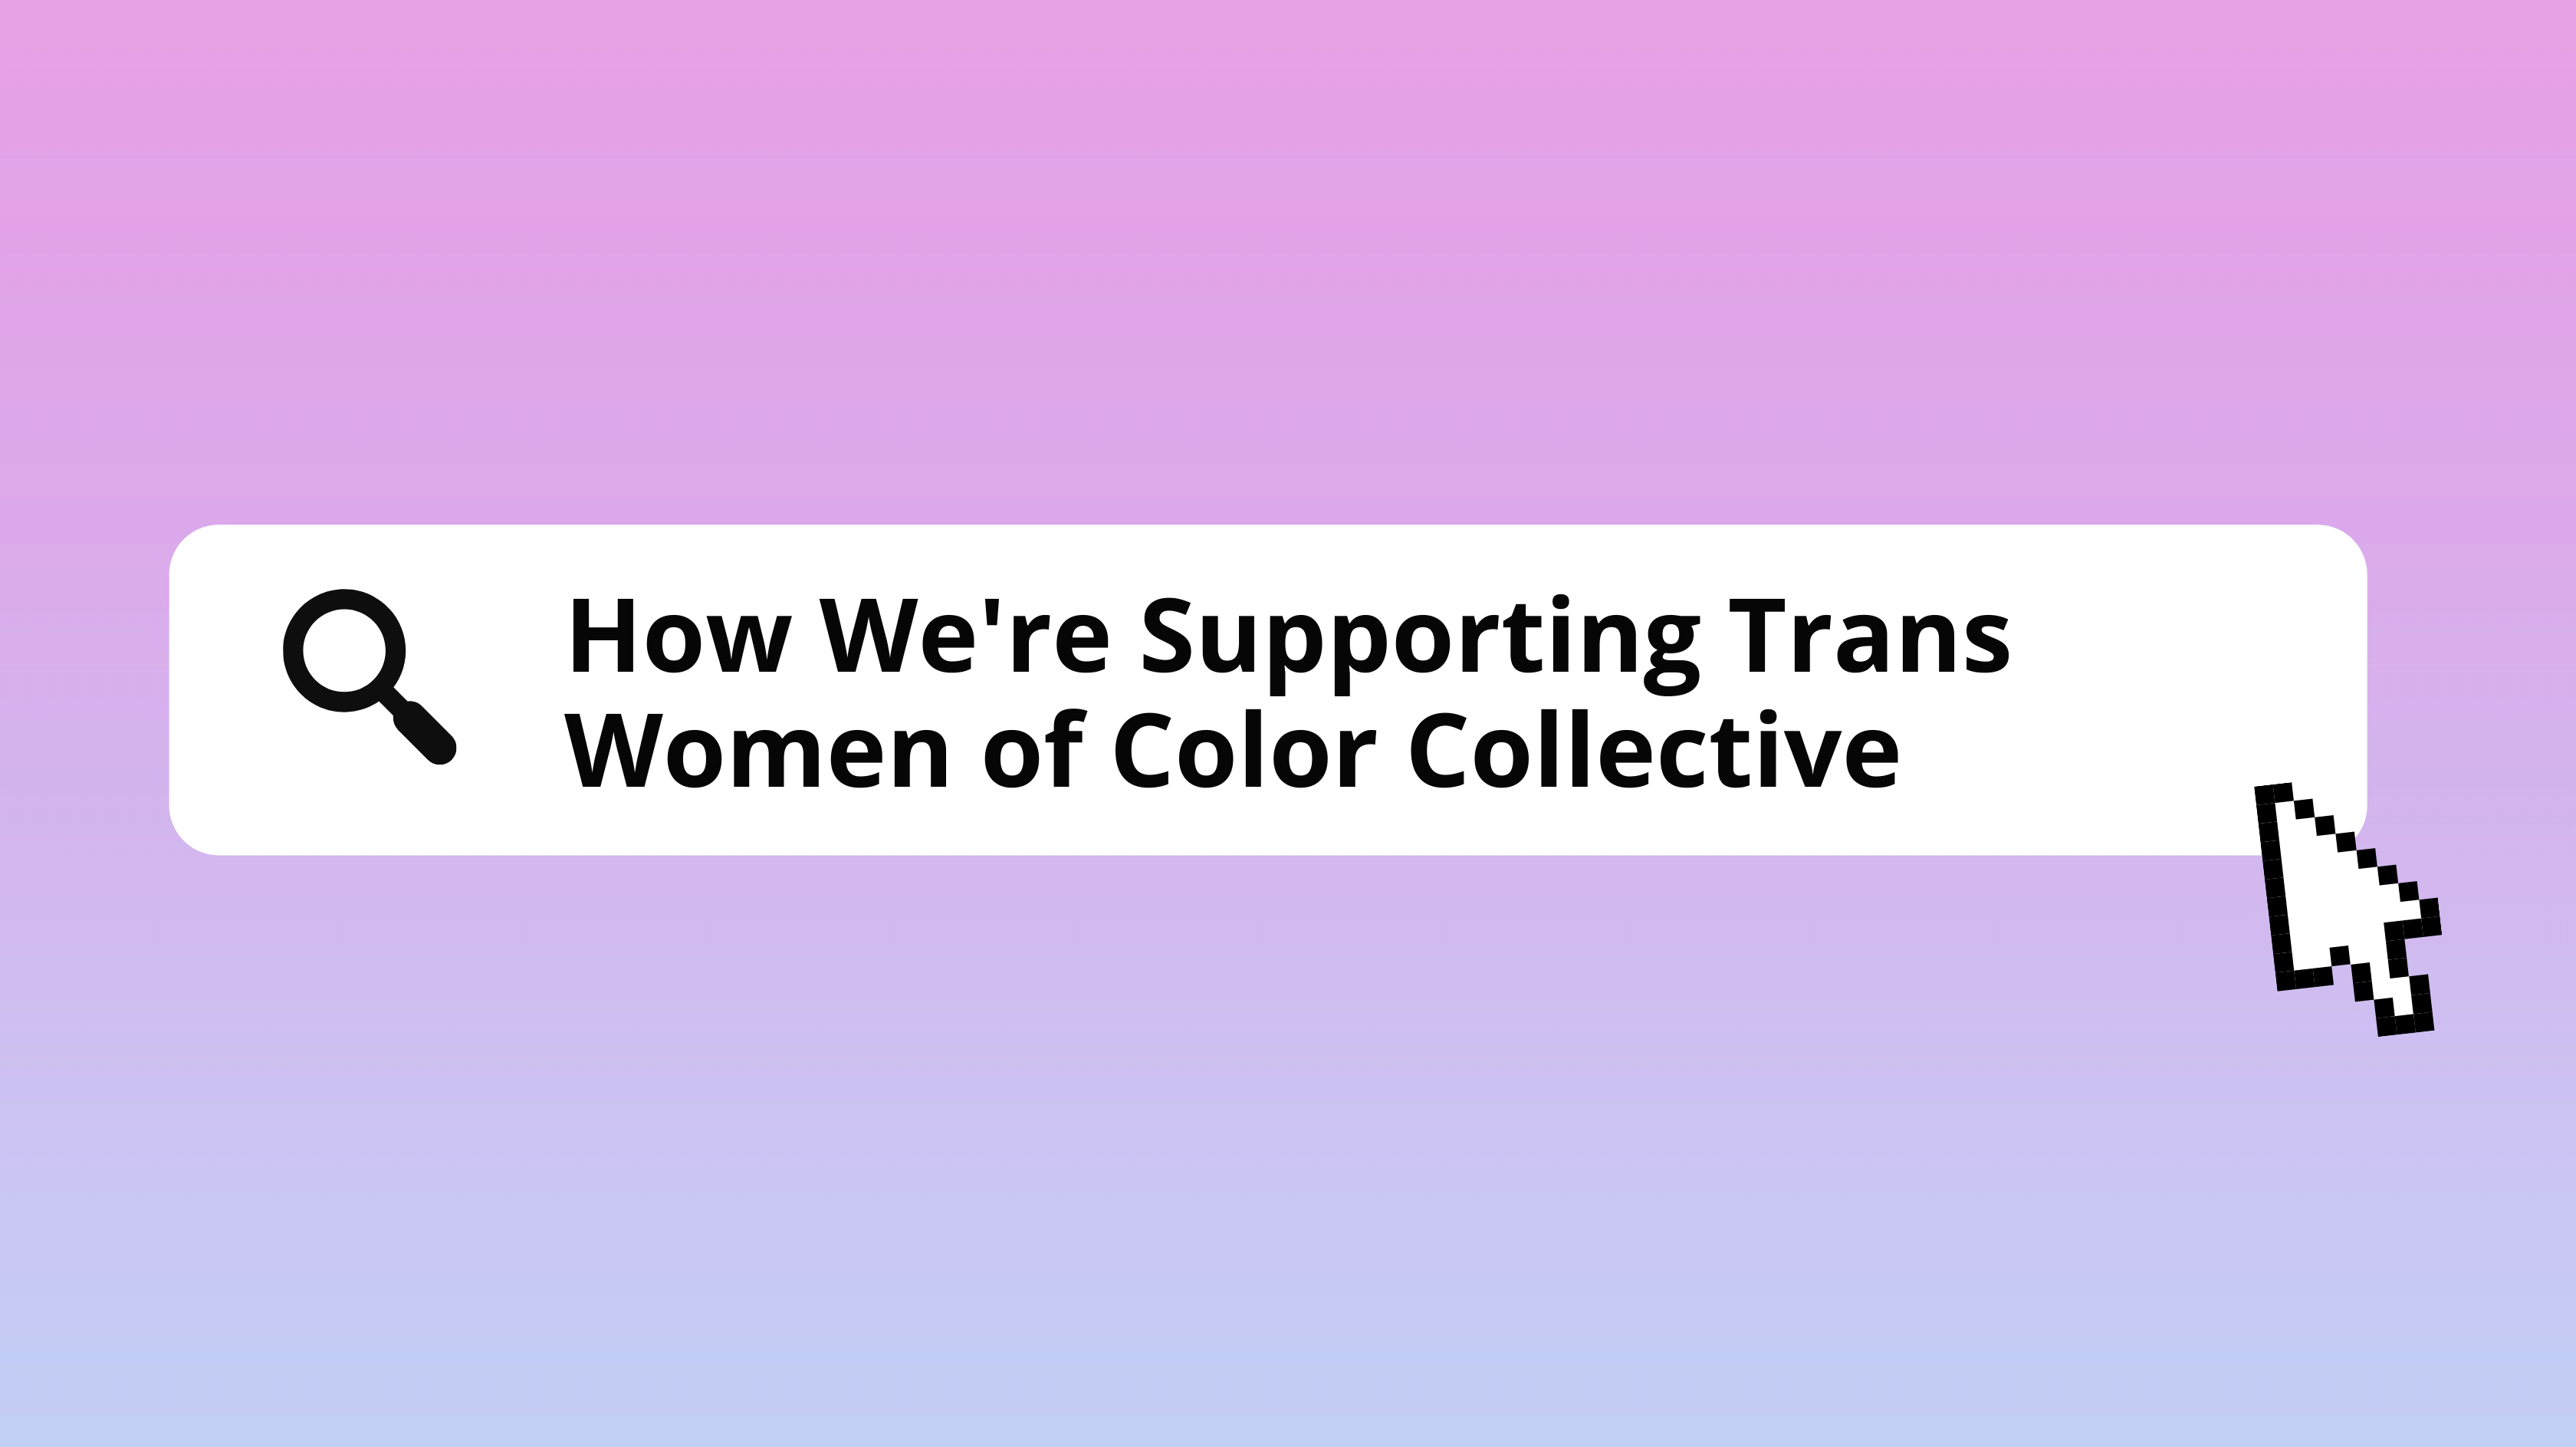 Pride Palace Donates to Trans Women of Color Collective!